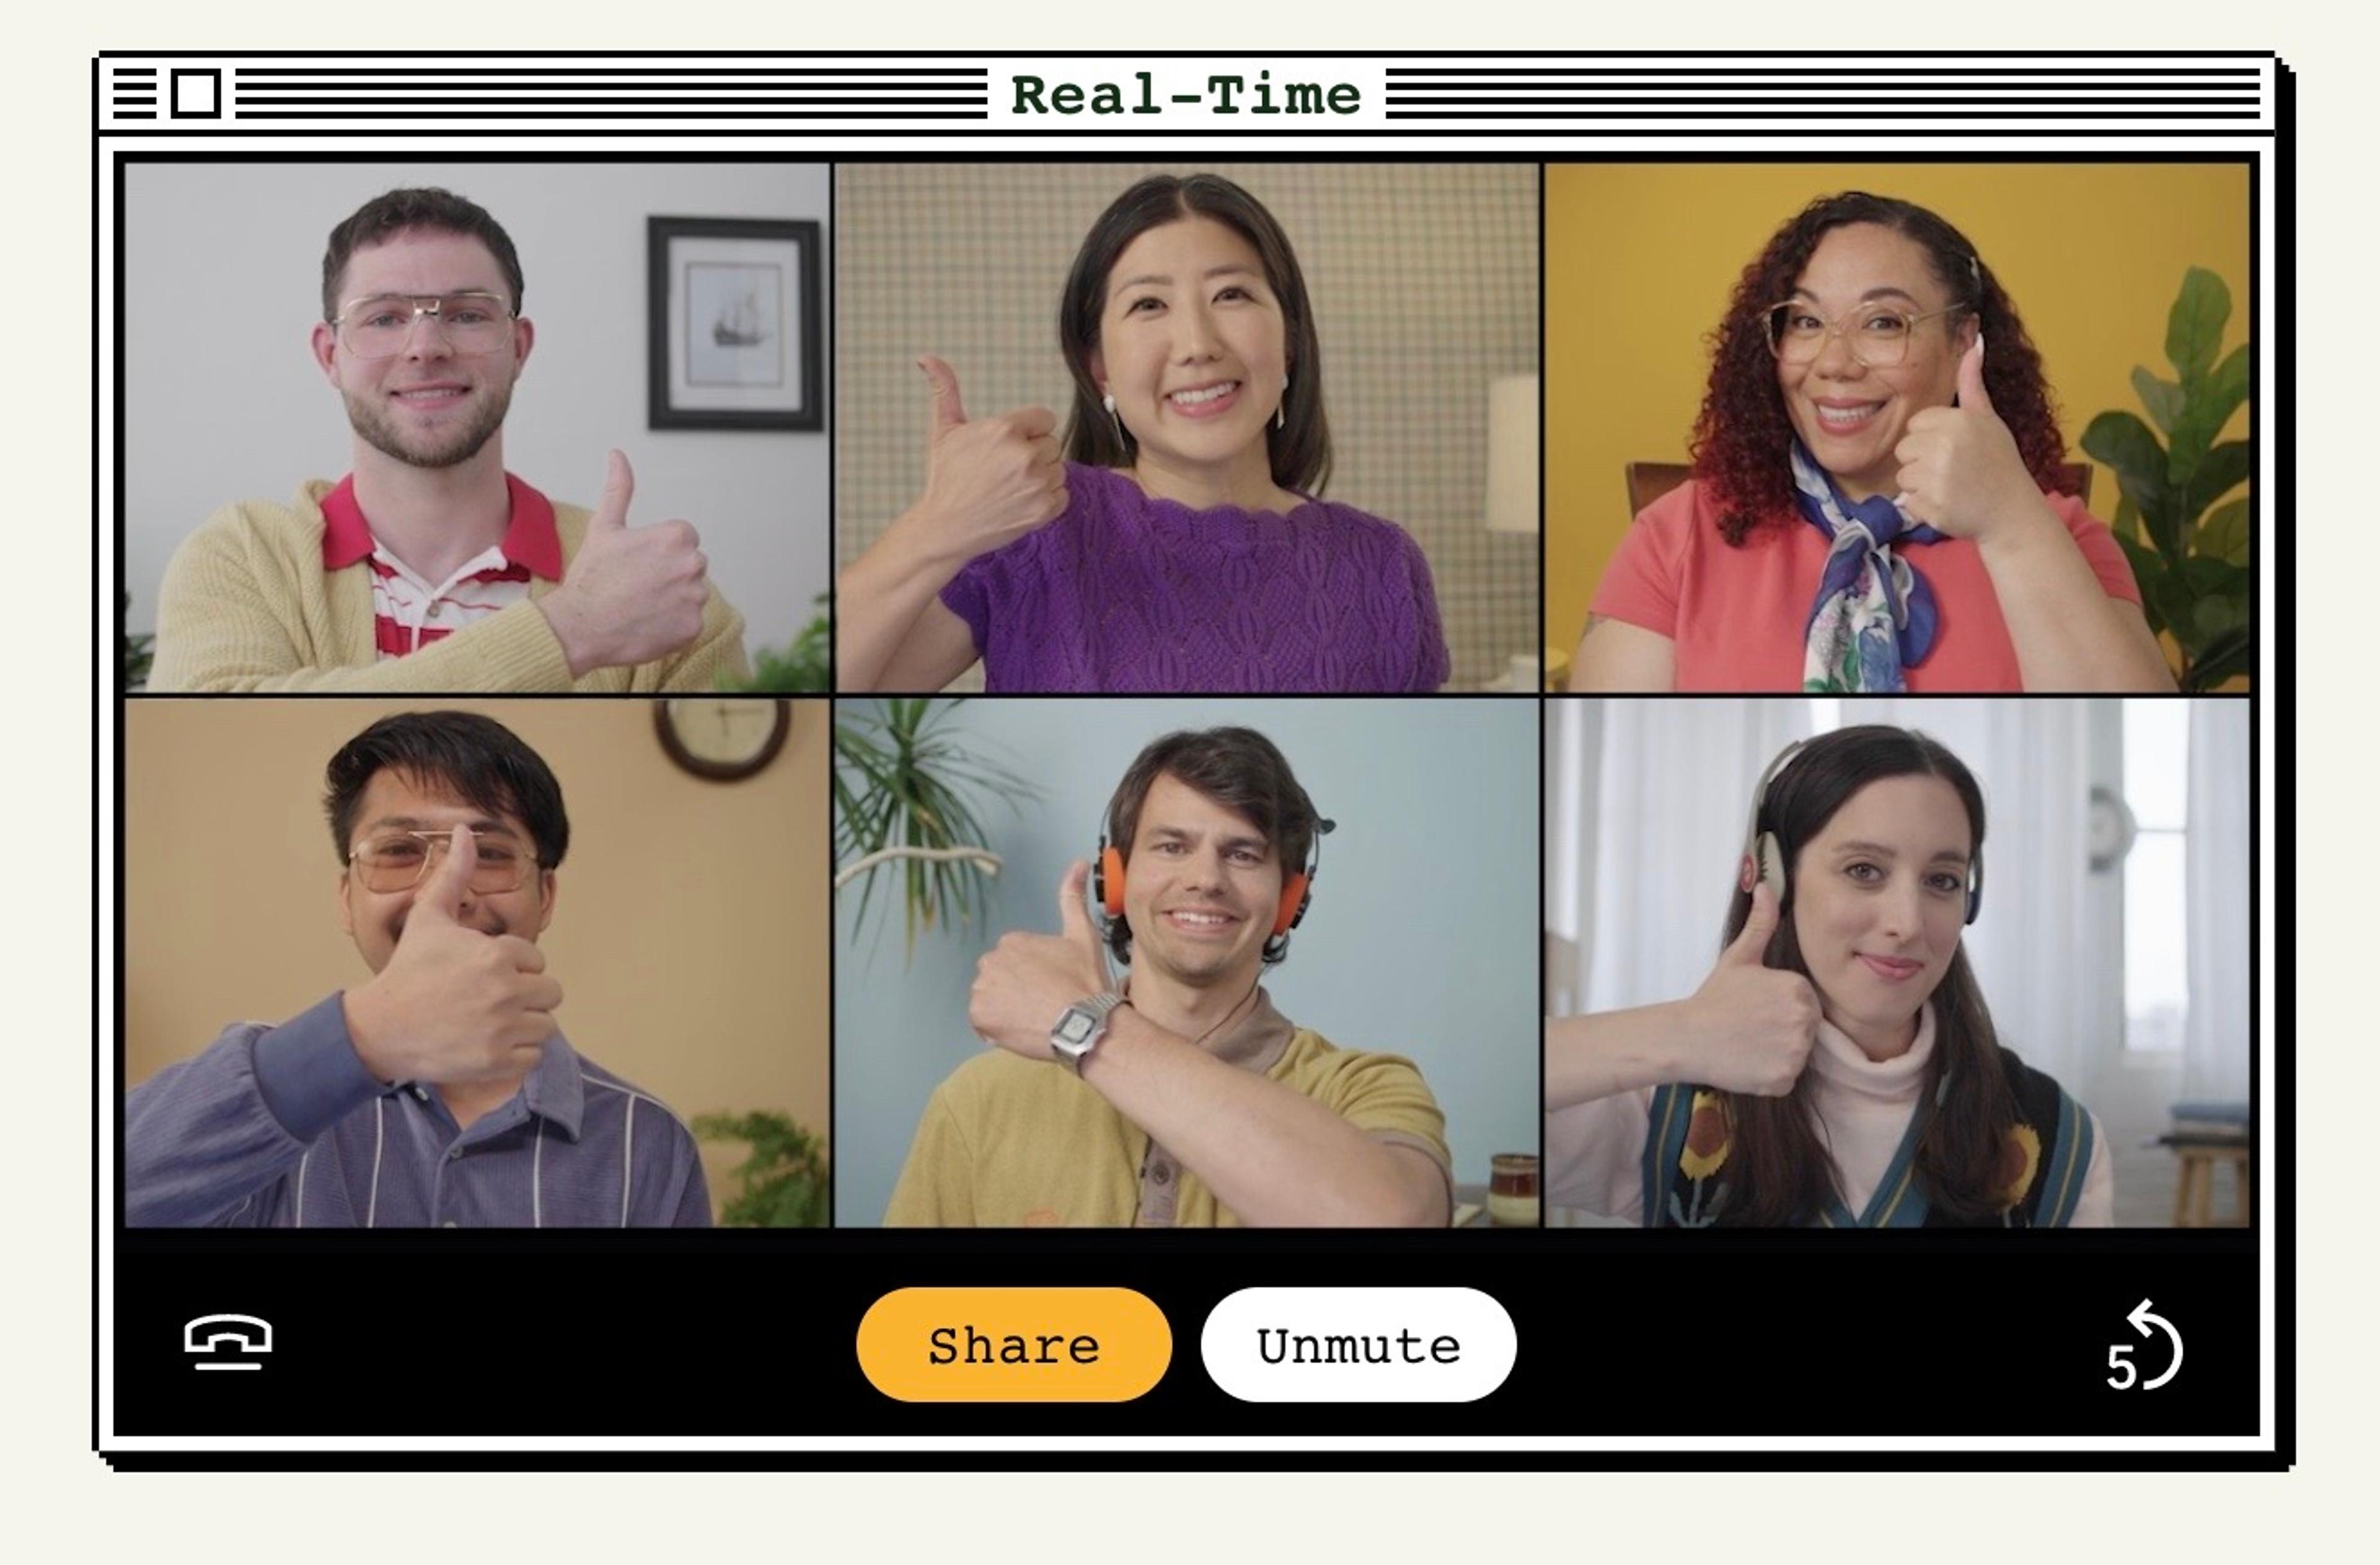 A retro-style video call window titled, "Real-Time". It depicts 6 people wearing colorful shirts in walls of varying background colors. They are all doing the thumbs up sign.